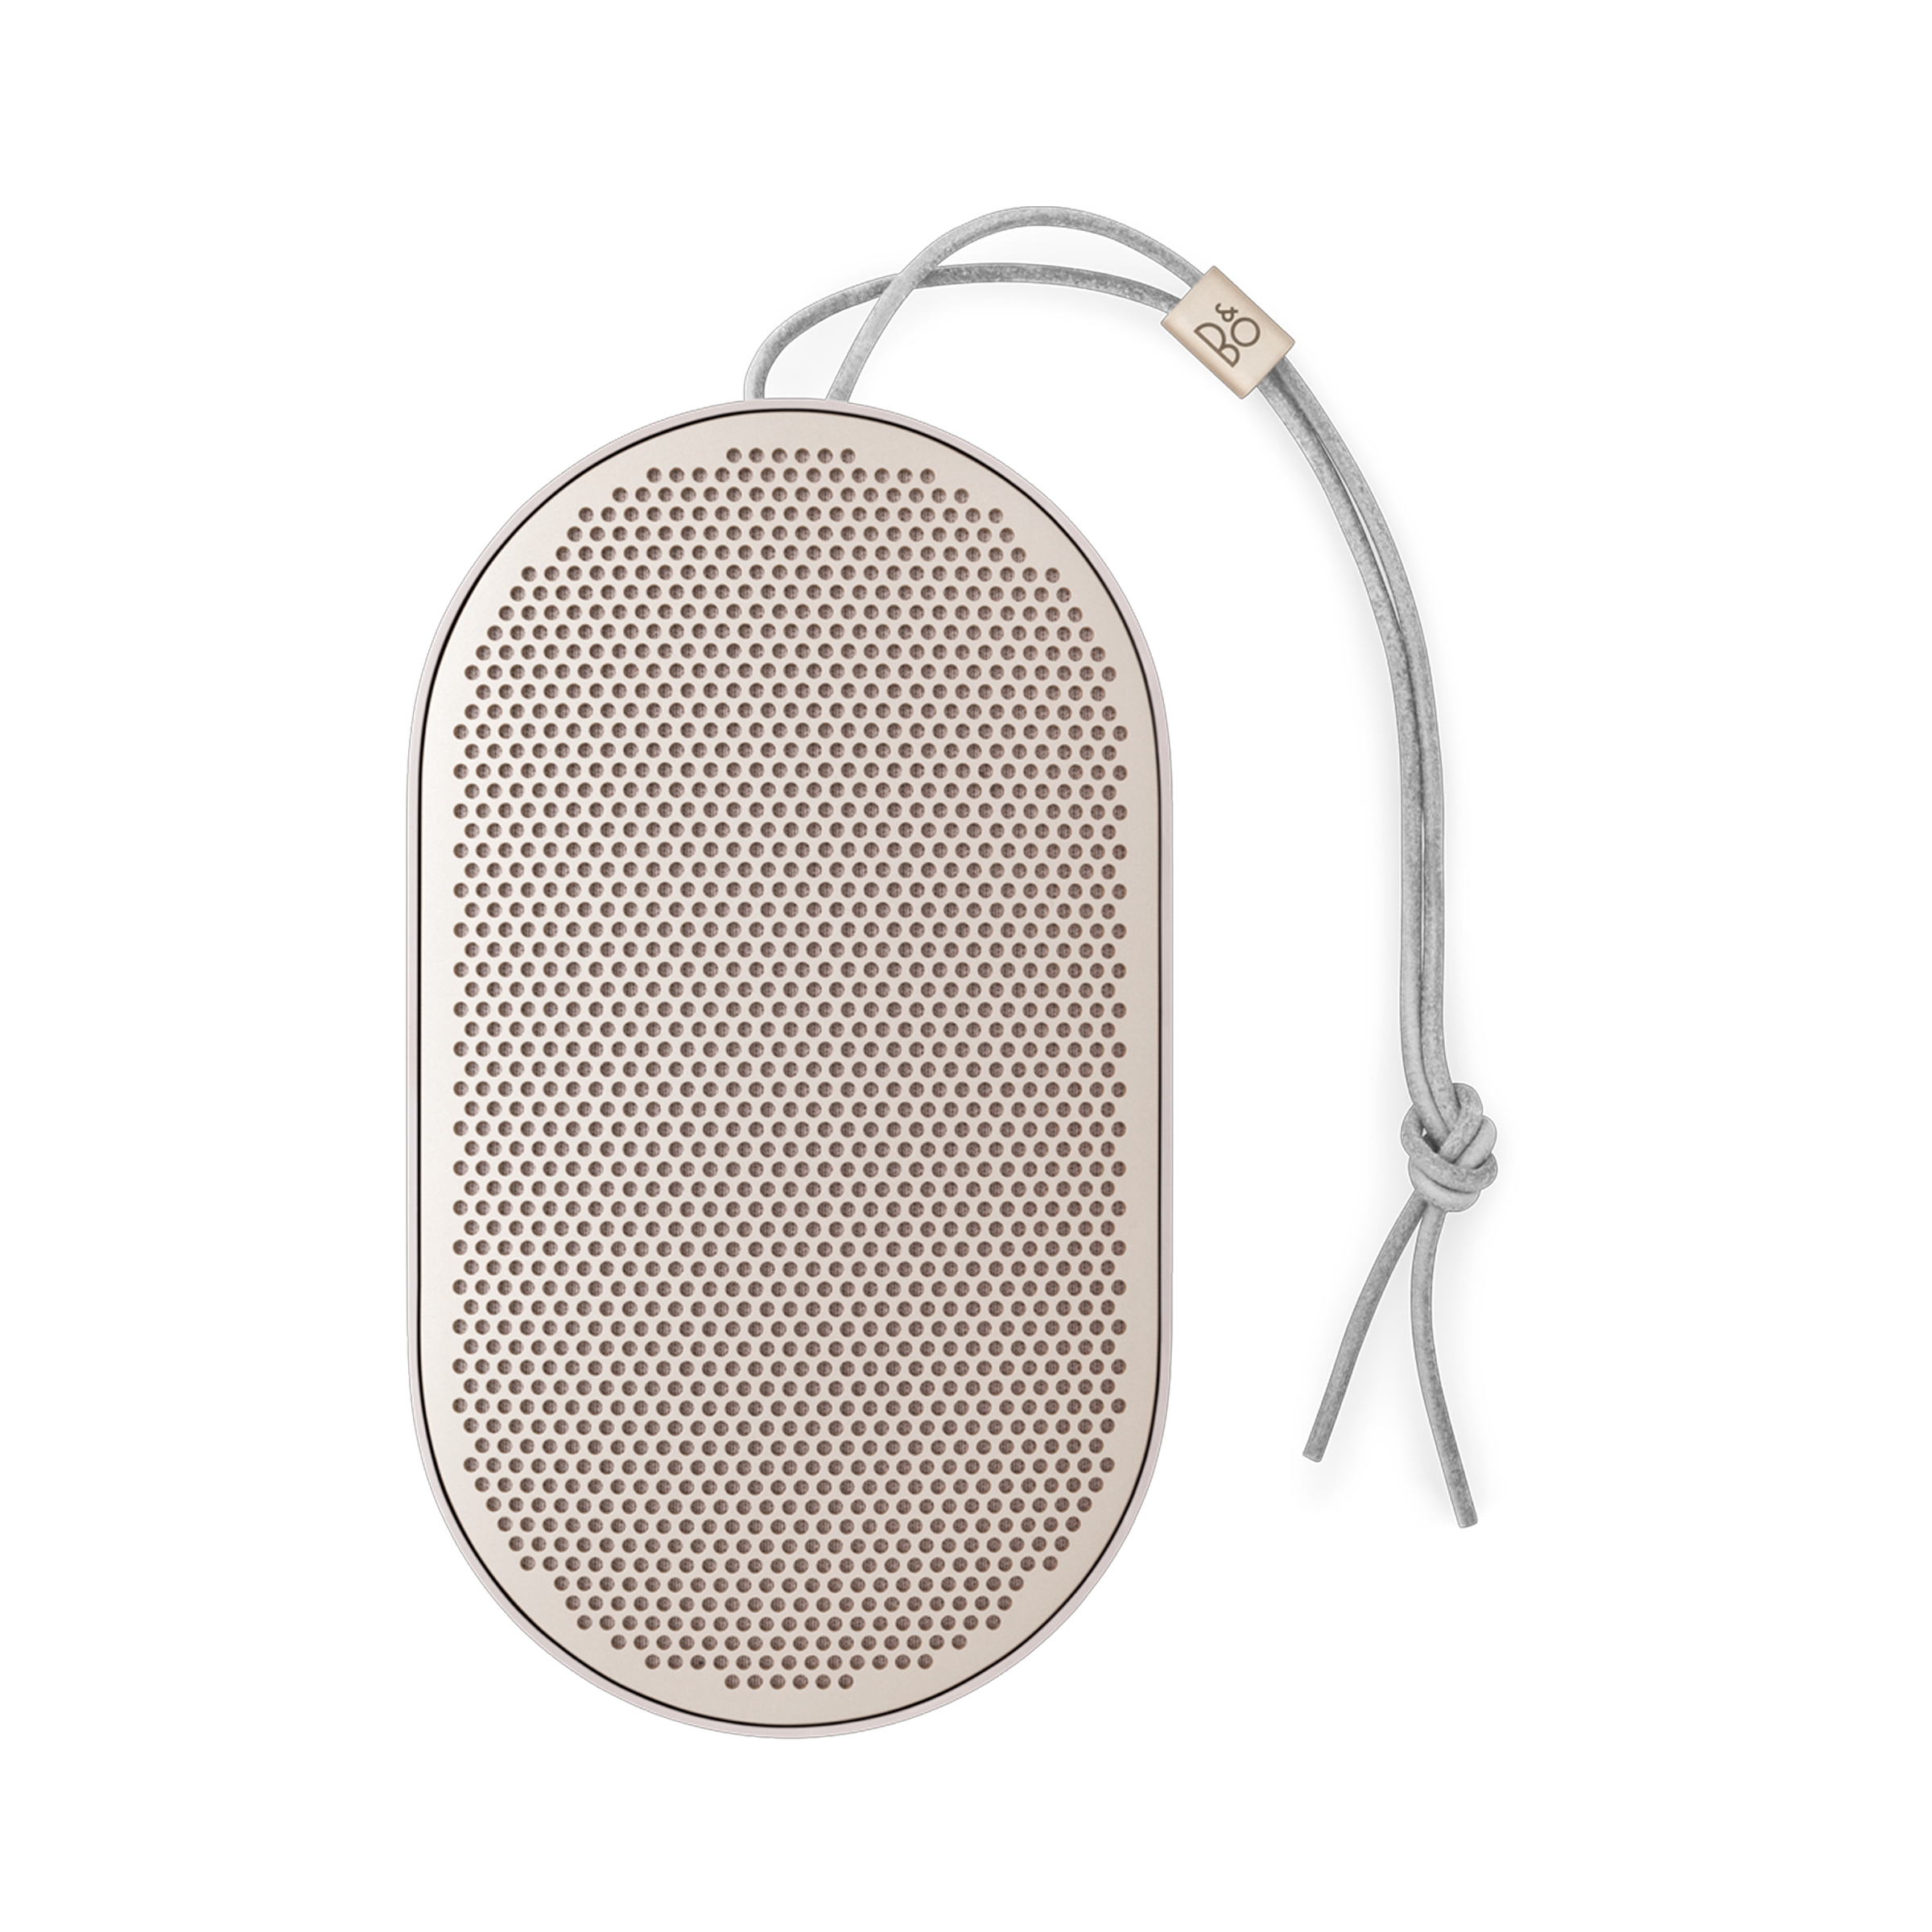 Beoplay - Personal, Portable Bluetooth Speaker | B&O